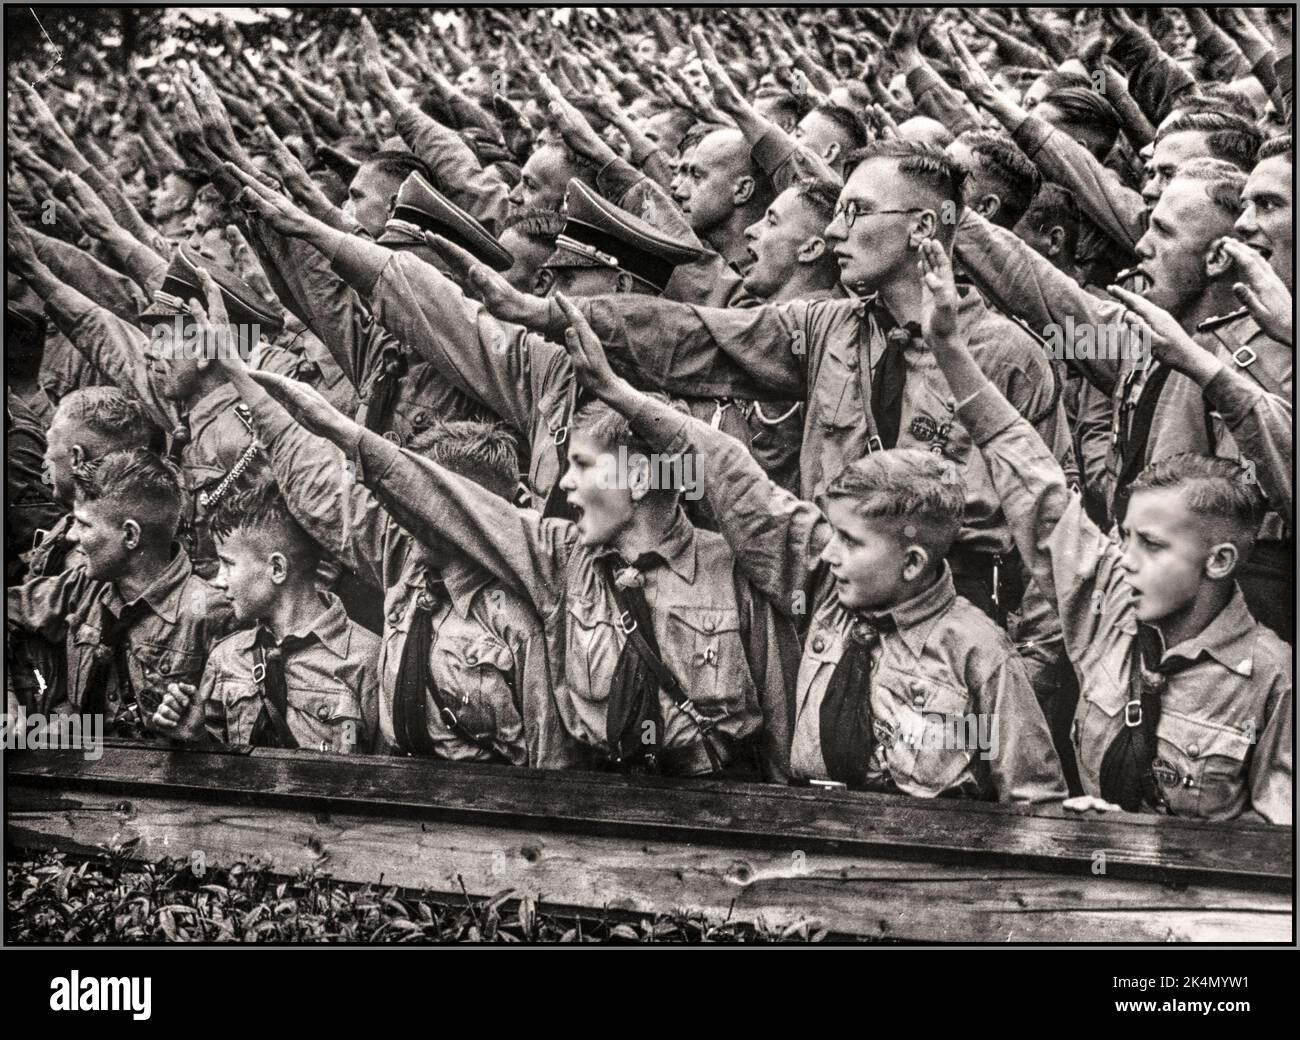 HEIL HITLER Hitler Youth Hitlerjugend salutes. Nazi indoctrination with boys and youths passionately giving Heil Hitler salutes at a Nazi Nuremberg Rally Nazi Germany 1937 Stock Photo